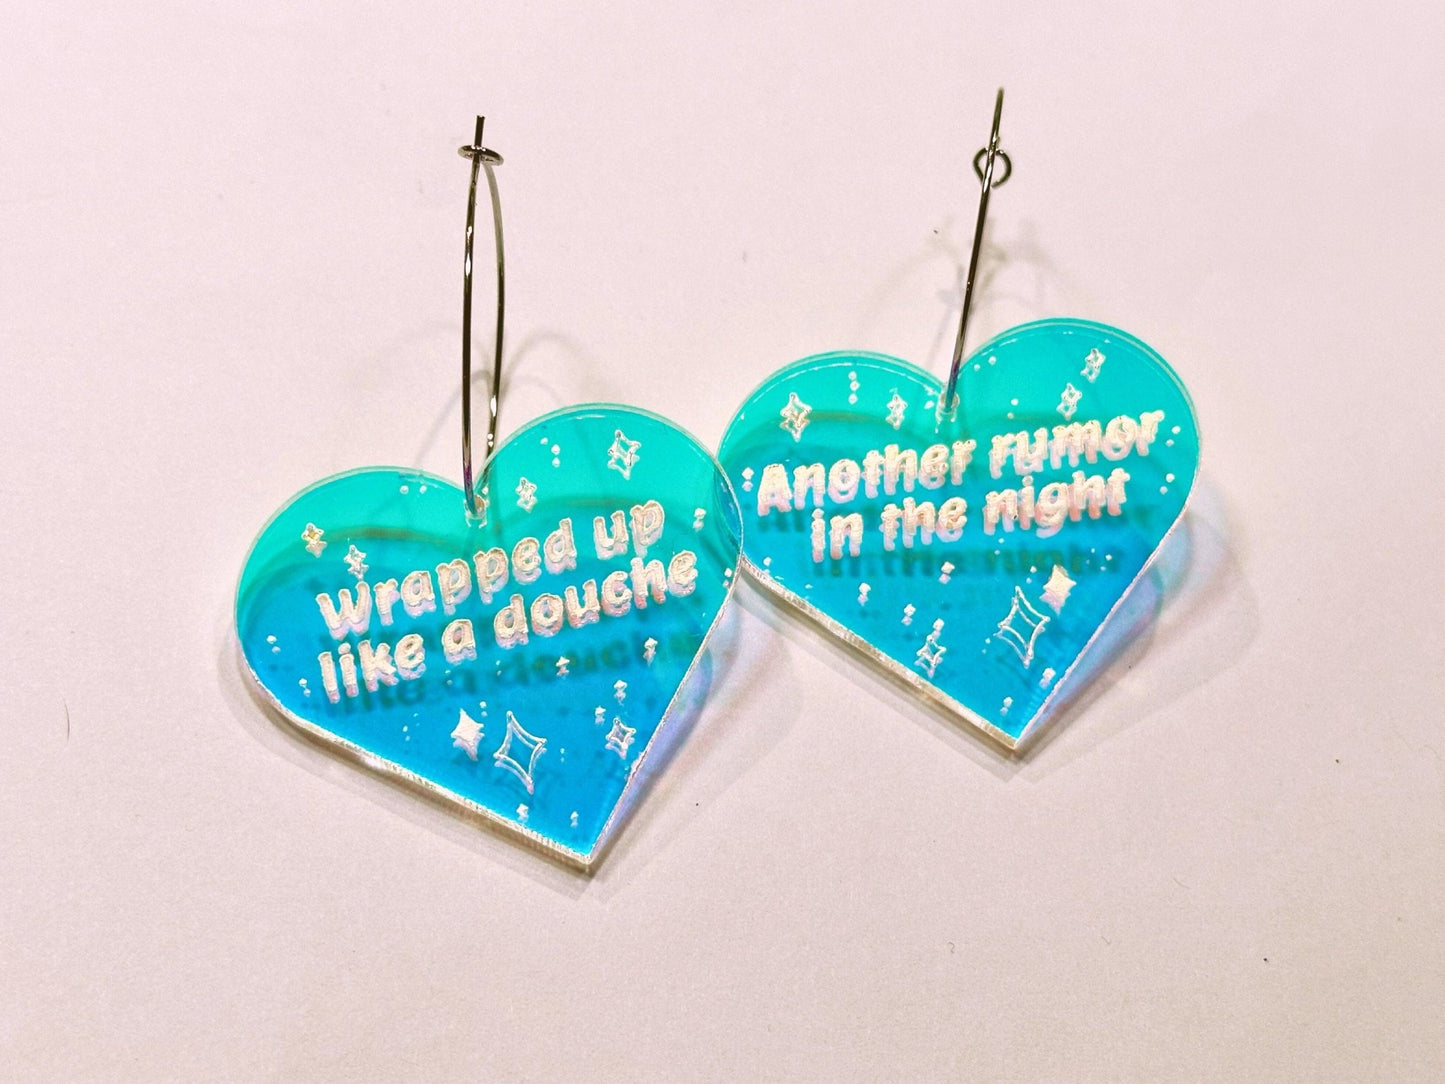 Misheard Lyrics Earrings | Wrapped Up Like A Douche, Another Rumor in the Night - Painted Raina